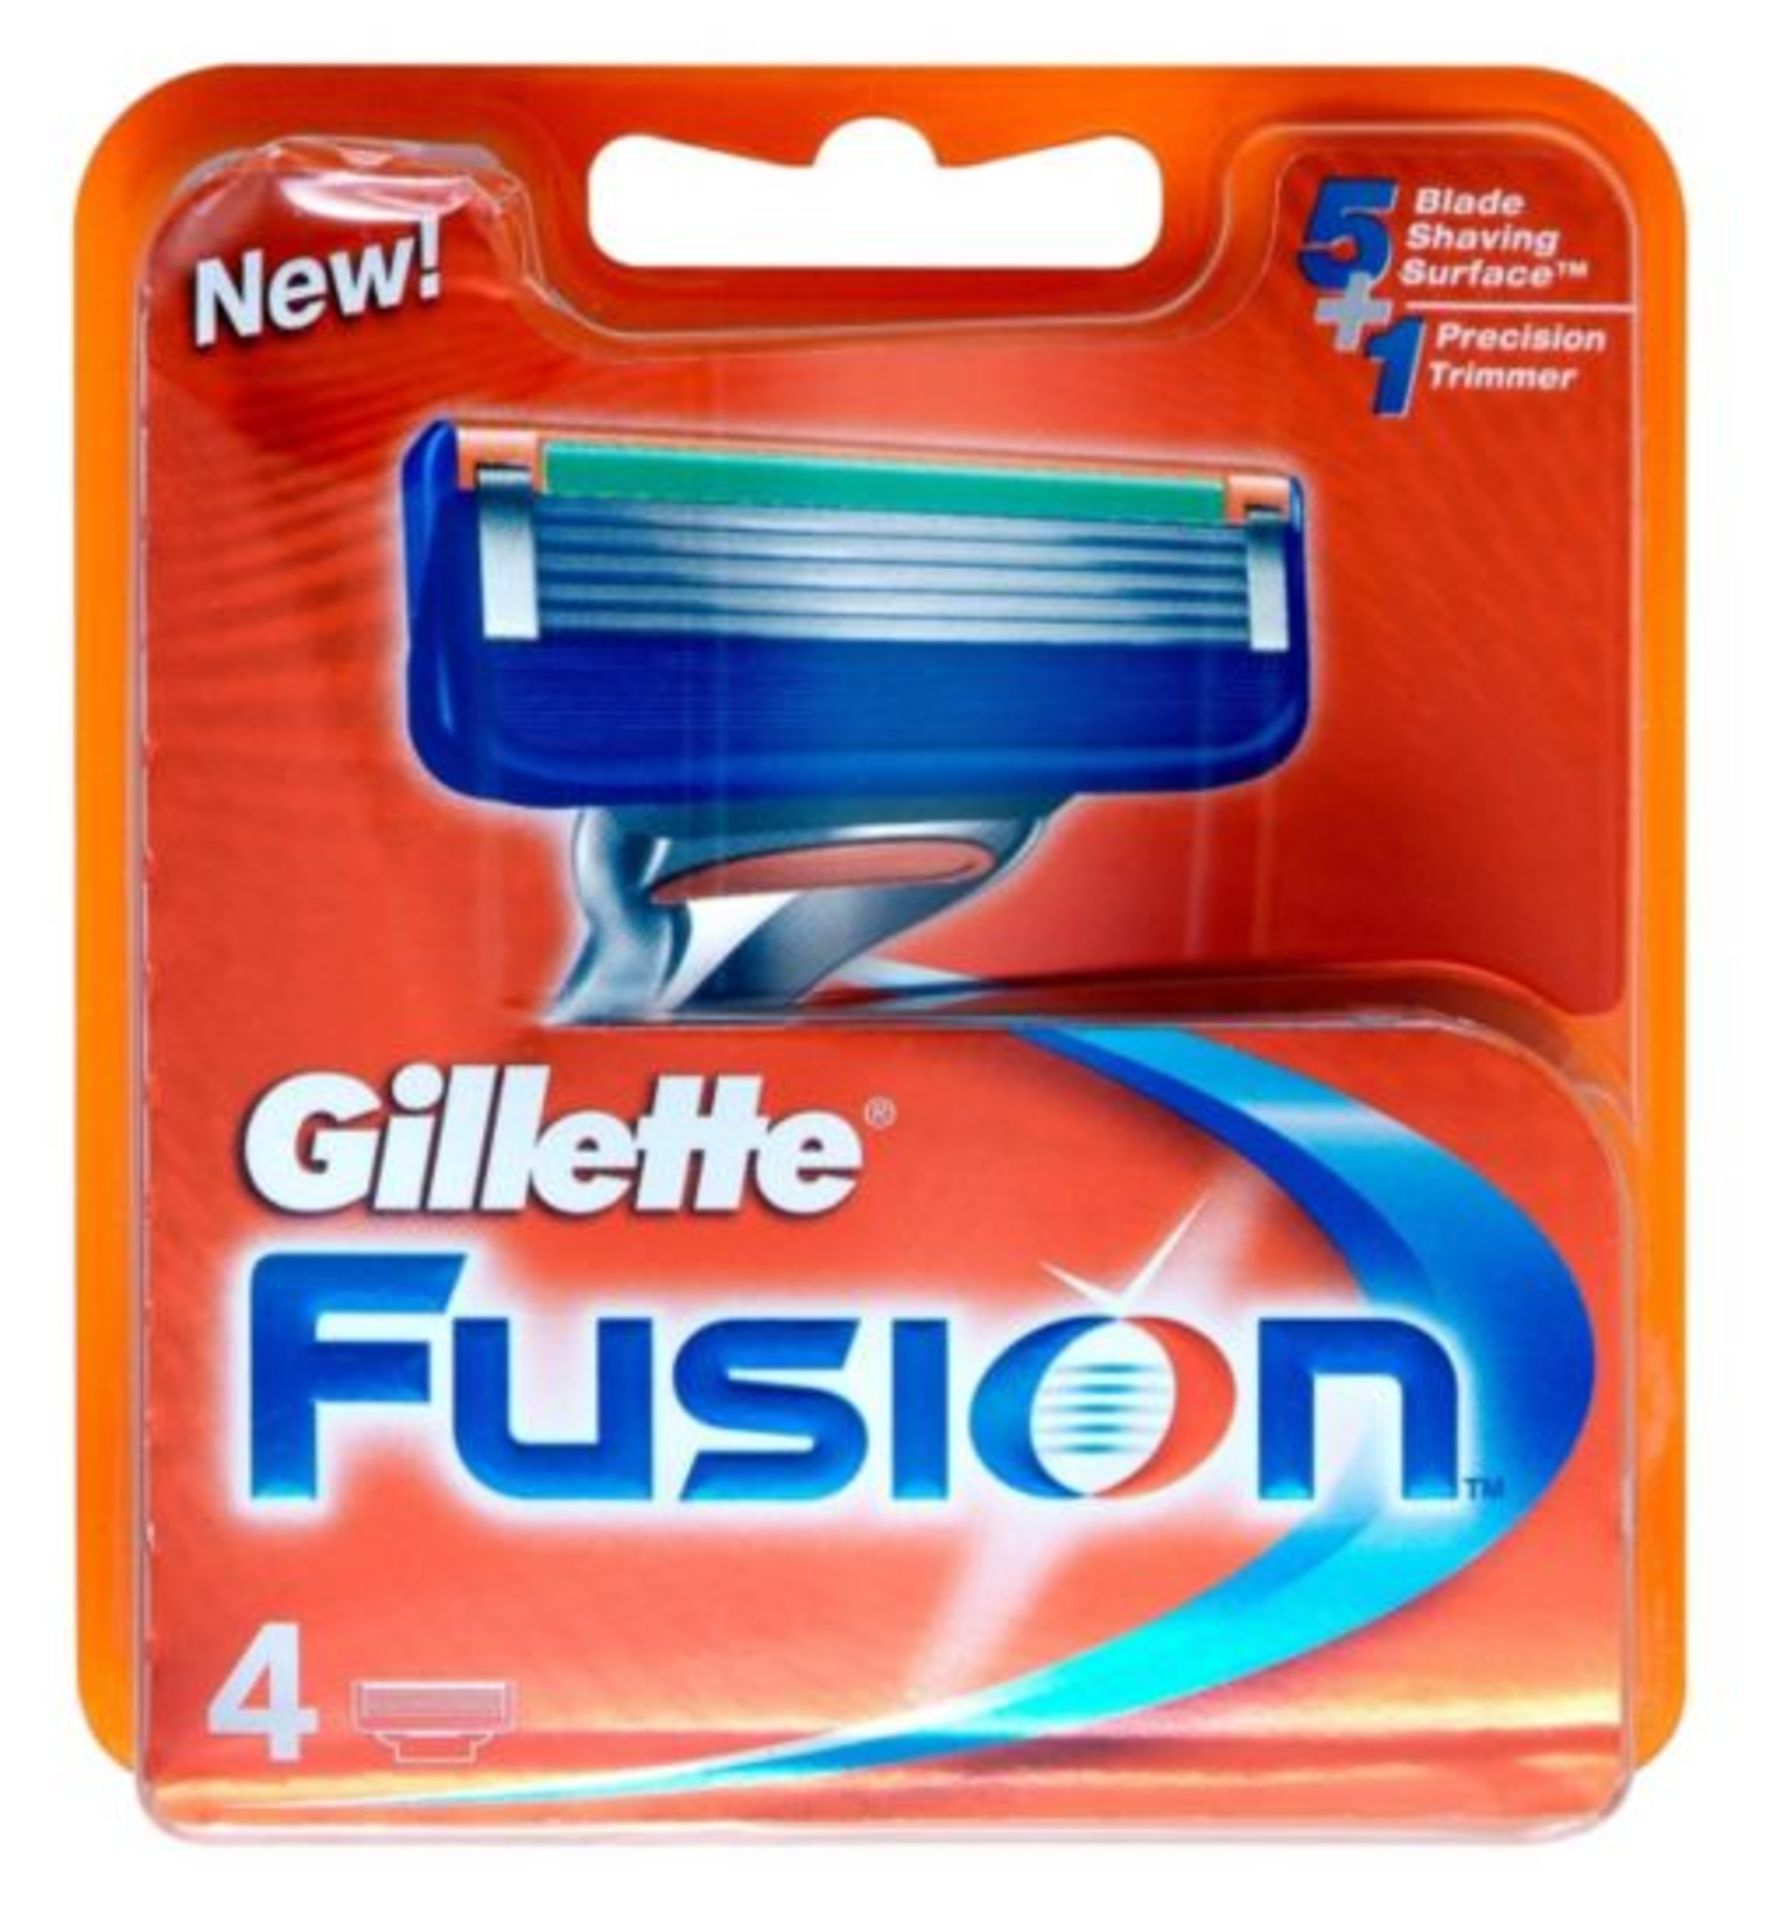 V Brand New Gillette Fusion Razor Blades 4 Pack RRP: £13.98 X 2 Bid price to be multiplied by Two